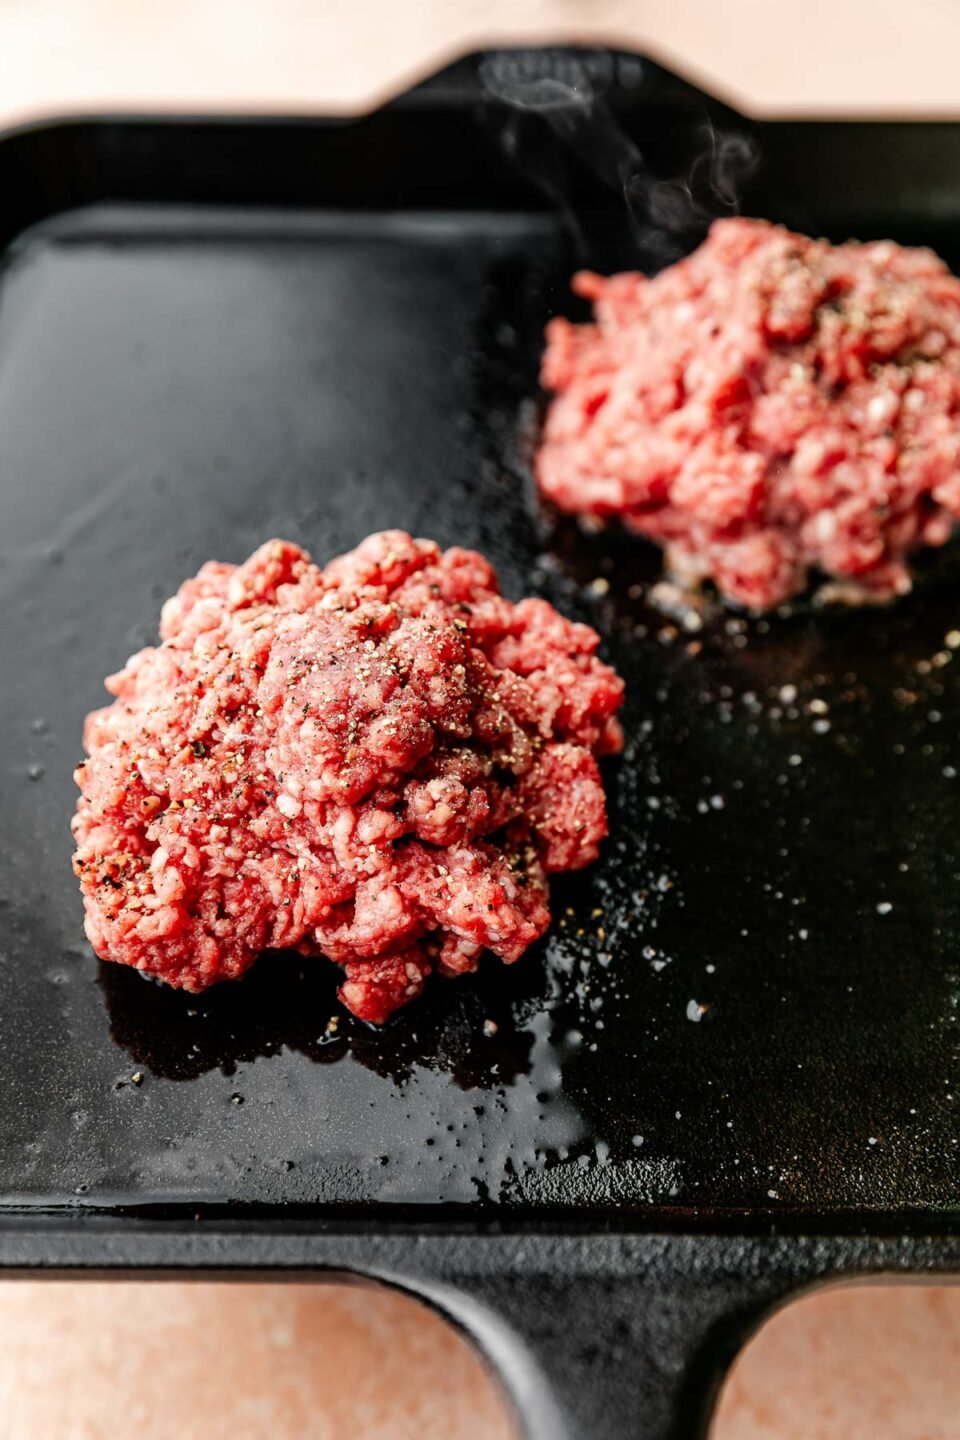 A close-up shot of two raw burger patties atop a black square skillet on a light pink surface.